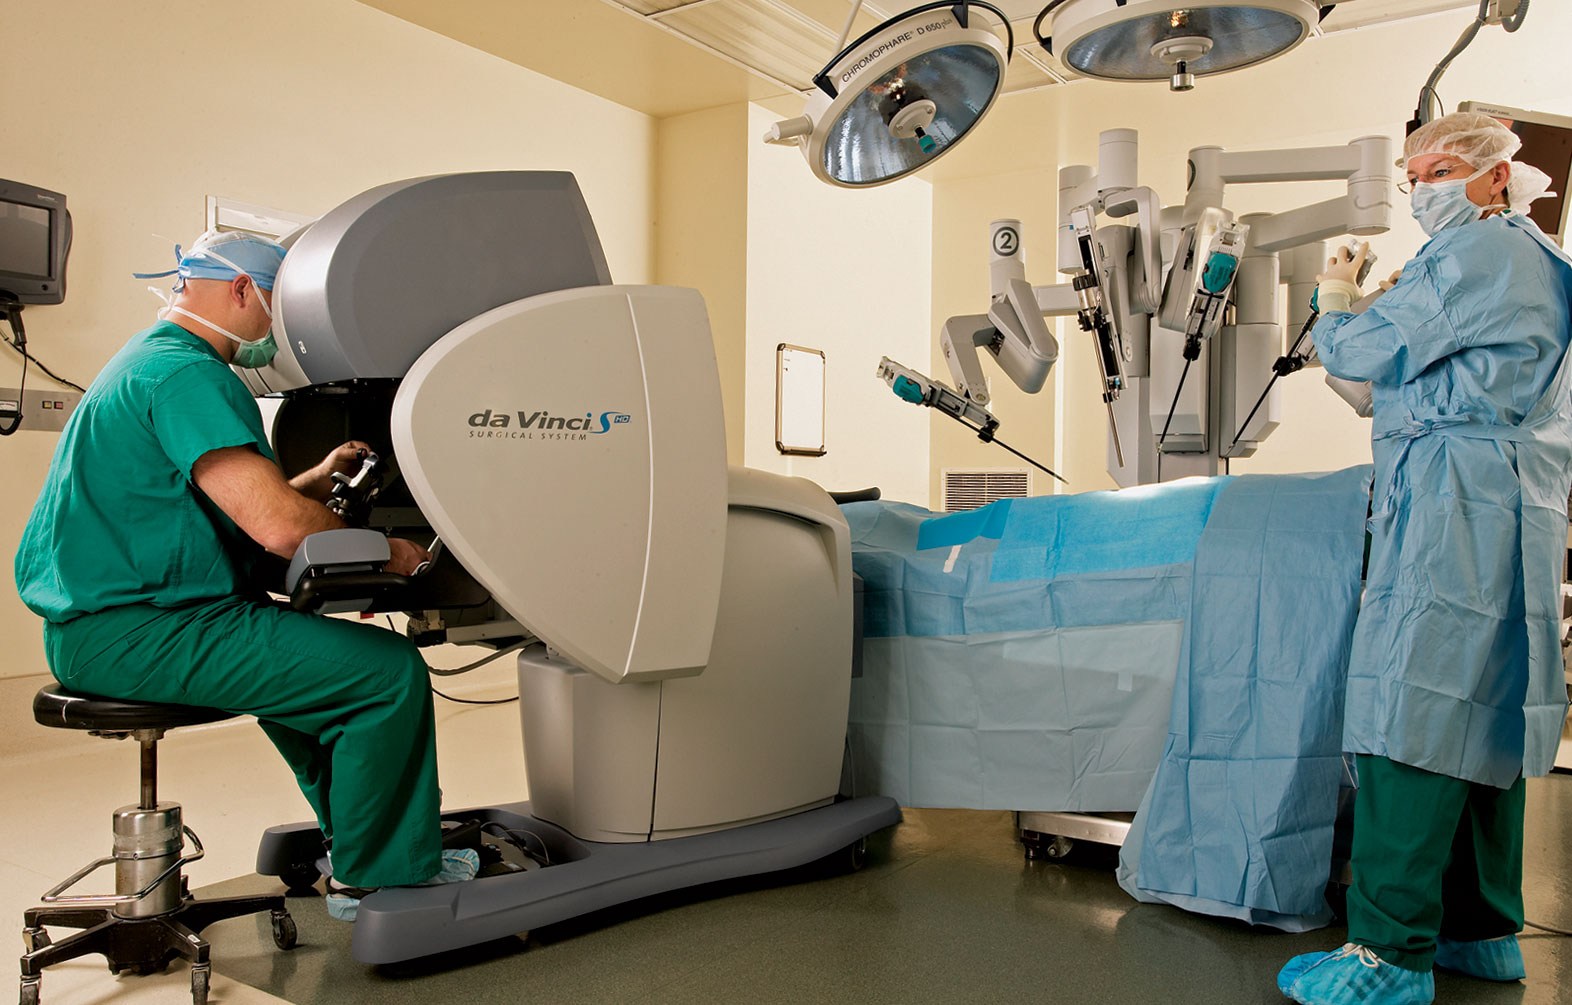 Eksperiment Bordenden Anbefalede Study In The Lancet Finds No Added Benefit In Robotic Surgery For Prostate  Cancer Patients - Medical Design and Outsourcing